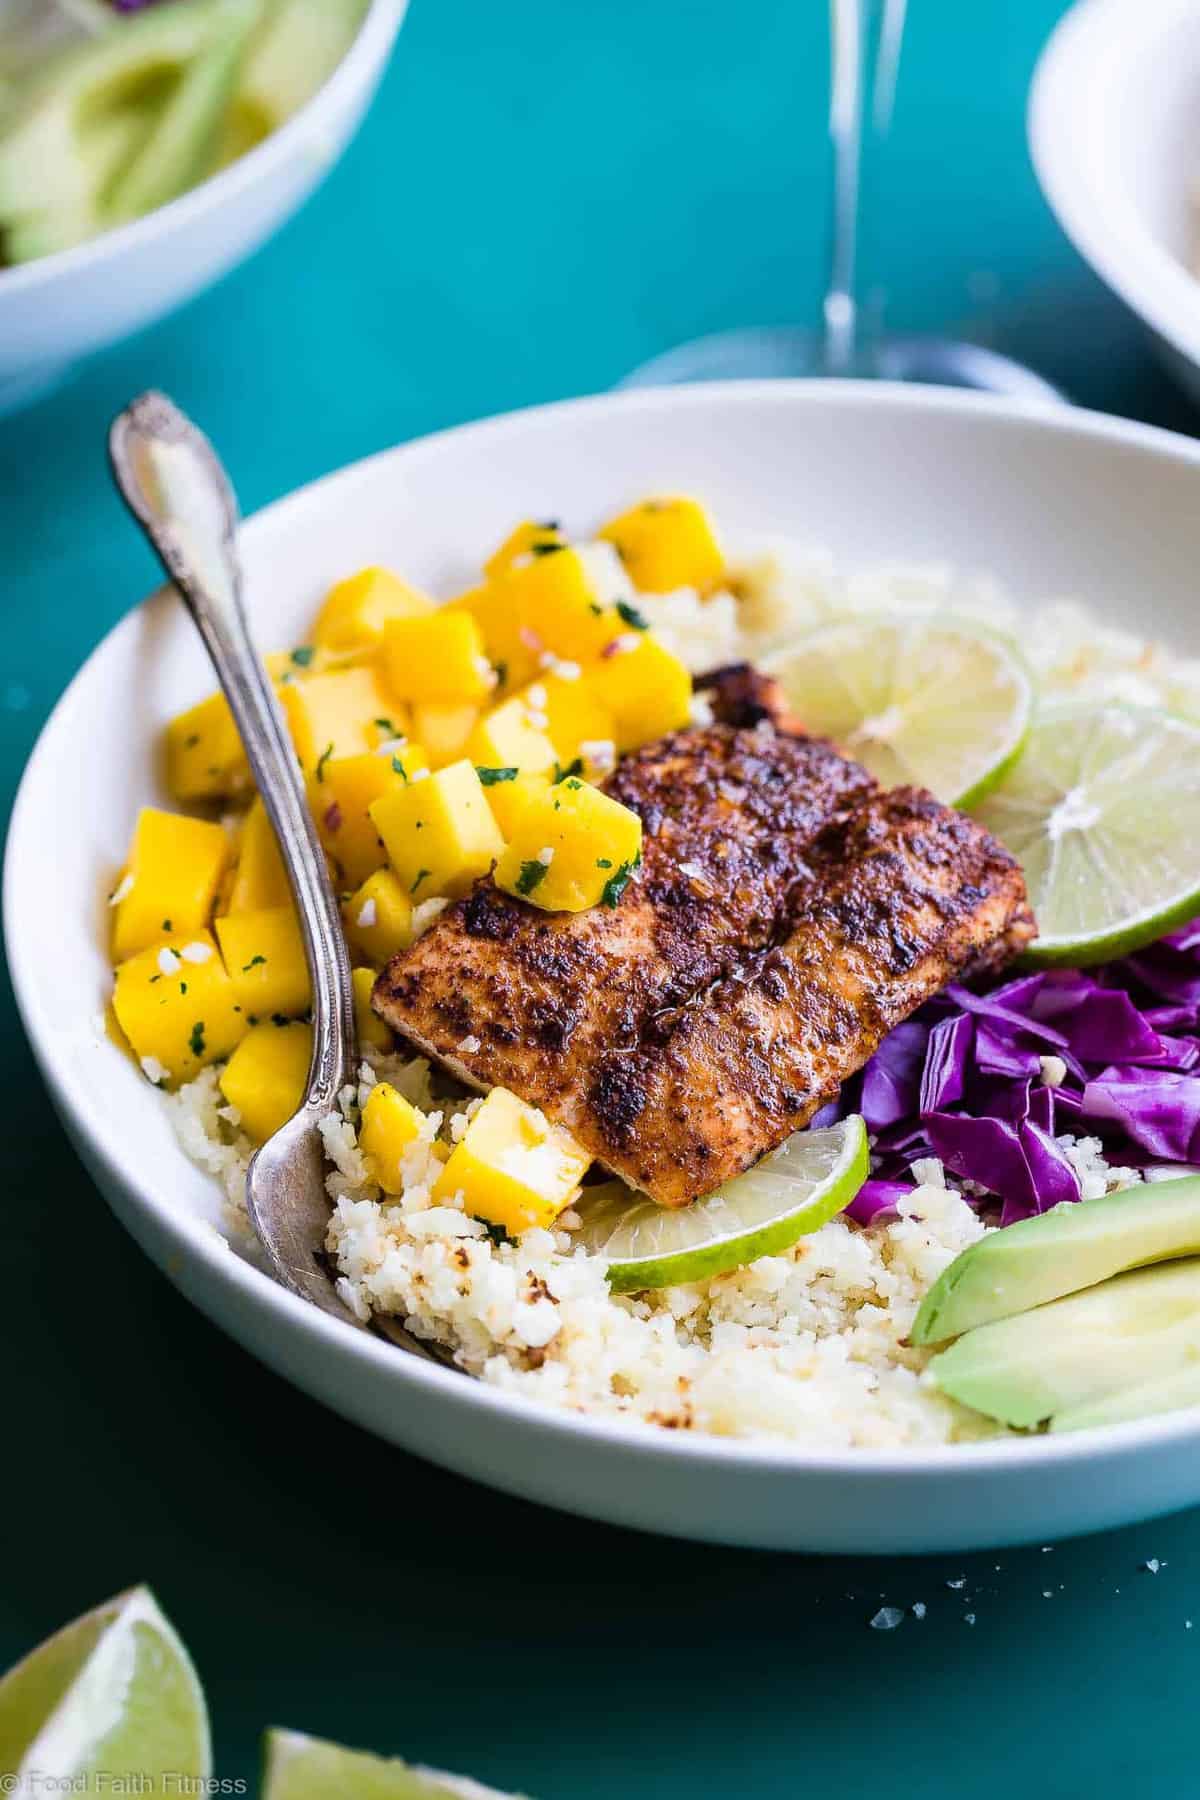 Low Carb Fish Taco Bowls - A healthier, gluten free spin on the classic Mexican dish that is SUPER easy to make and will please even the pickiest eaters! On the table in 30 minutes are perfect for busy weeknights! | #Foodfaithfitness | #Glutenfree #Lowcarb #Healthy #Fishtaco #Mexican